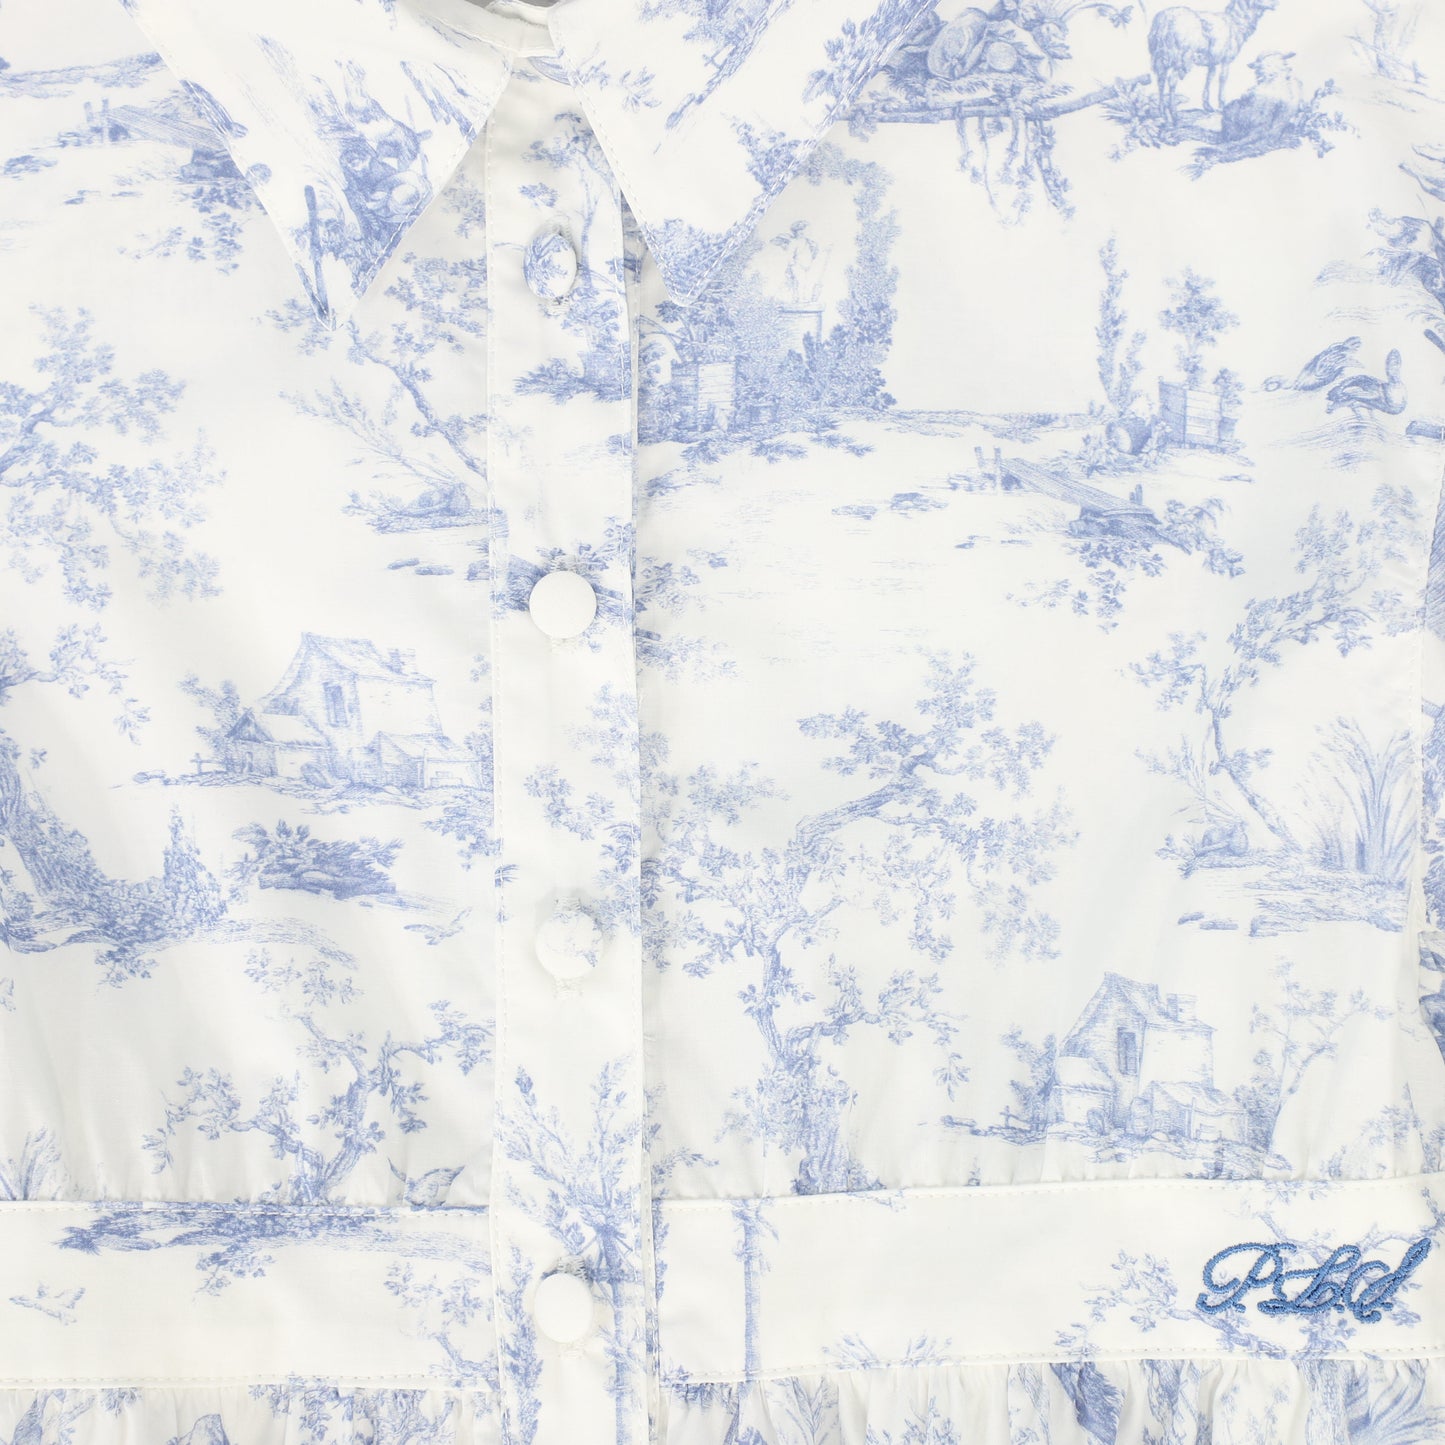 PHILOSOPHY CREAM WITH BLUE FLORAL PRINT DRESS